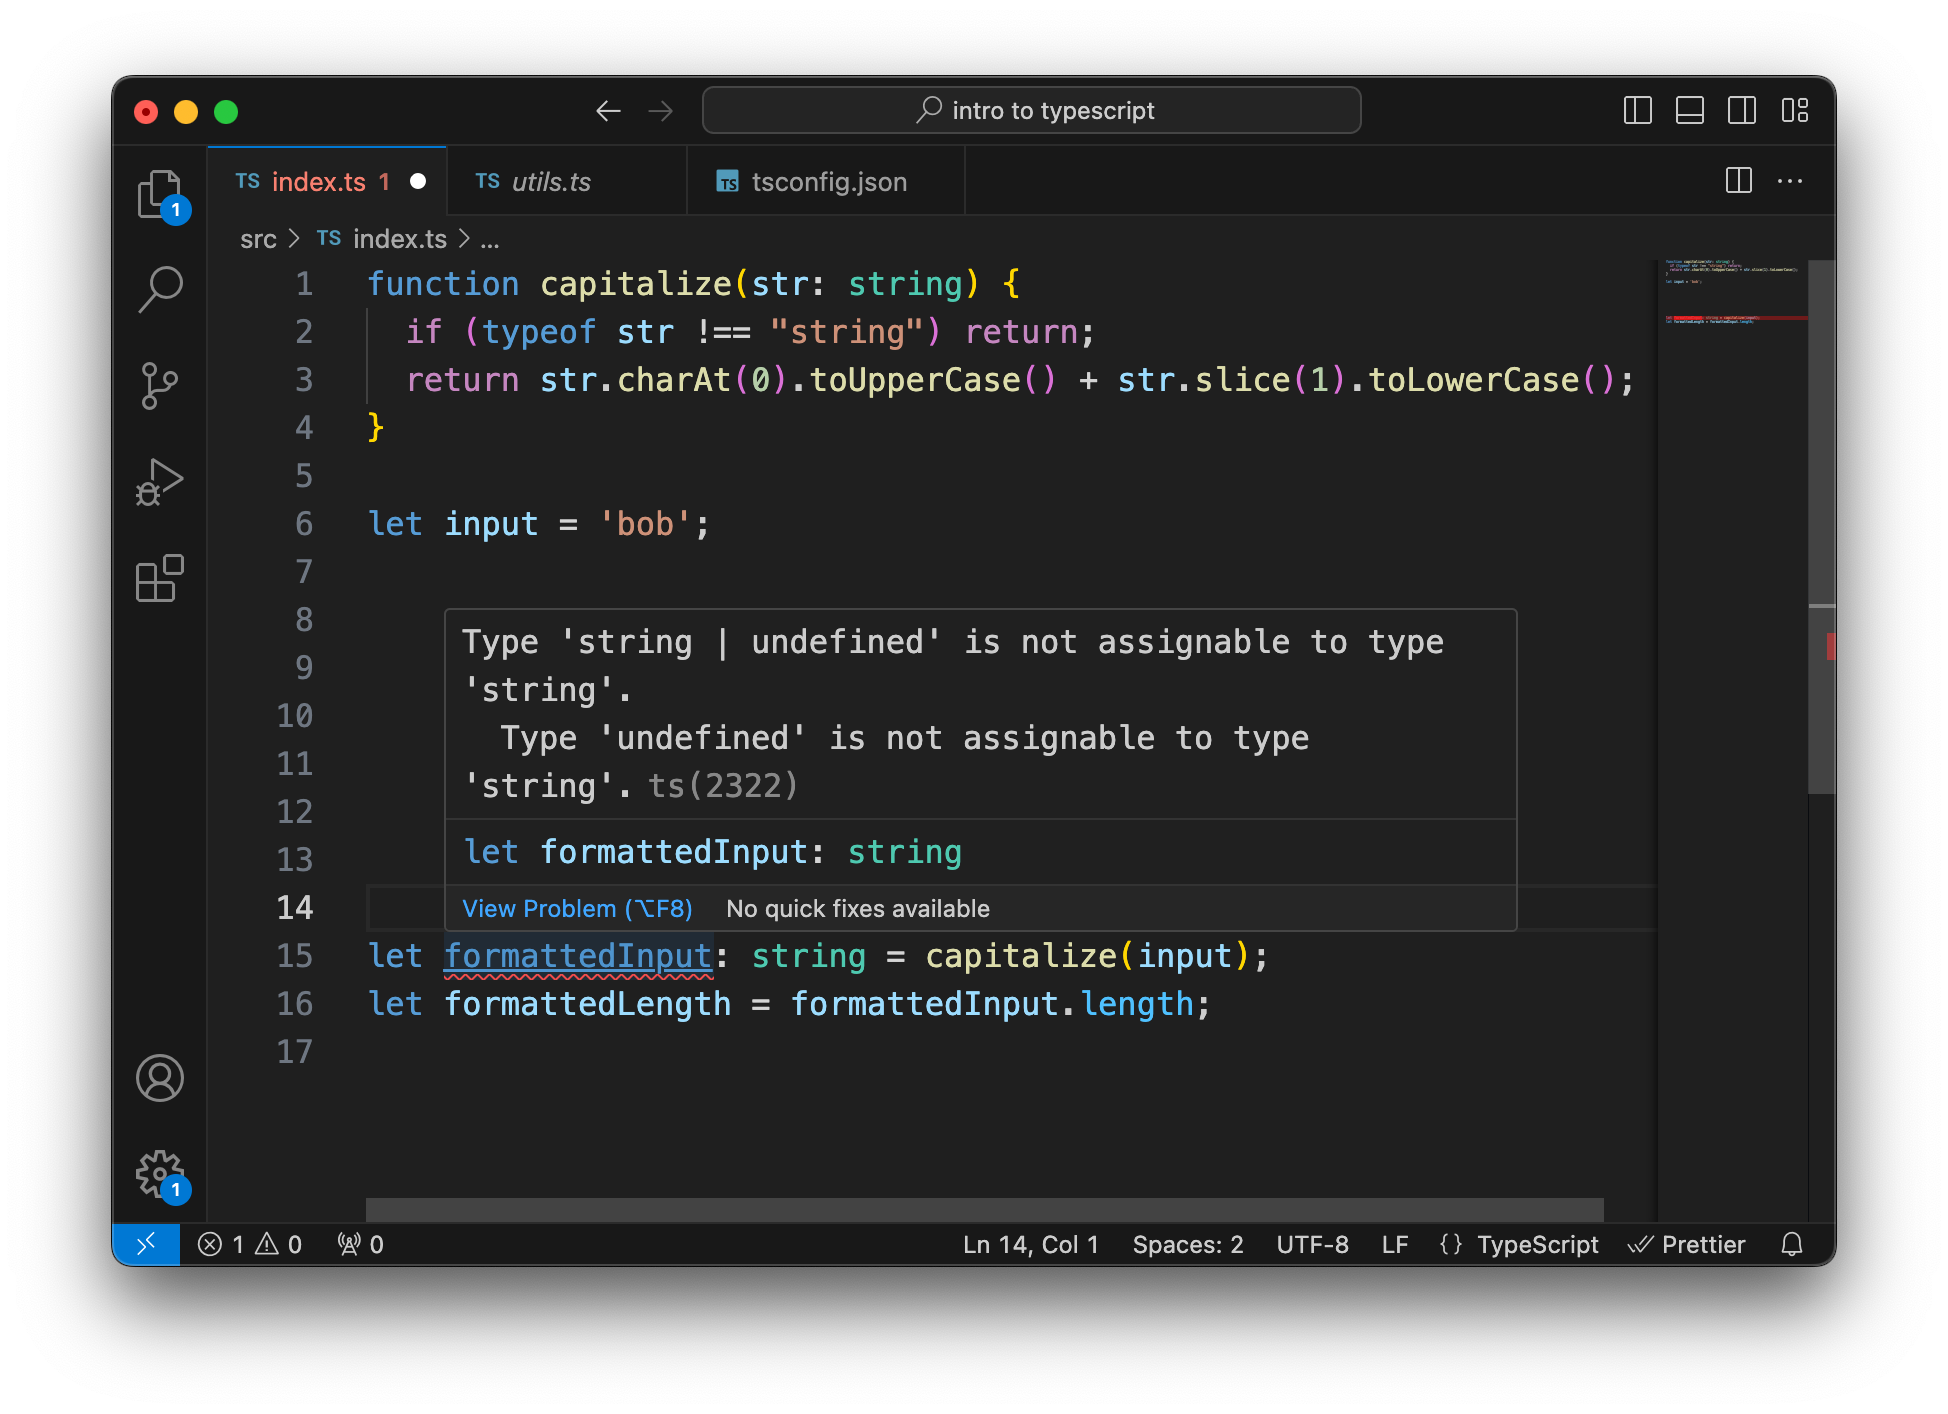 VS Code with the same TypeScript file as before. Except, that now the variable we set to the returned value of our capitalize function has to be a string. This revealed that there might be a type mismatch because the capitalize function might return undefined.